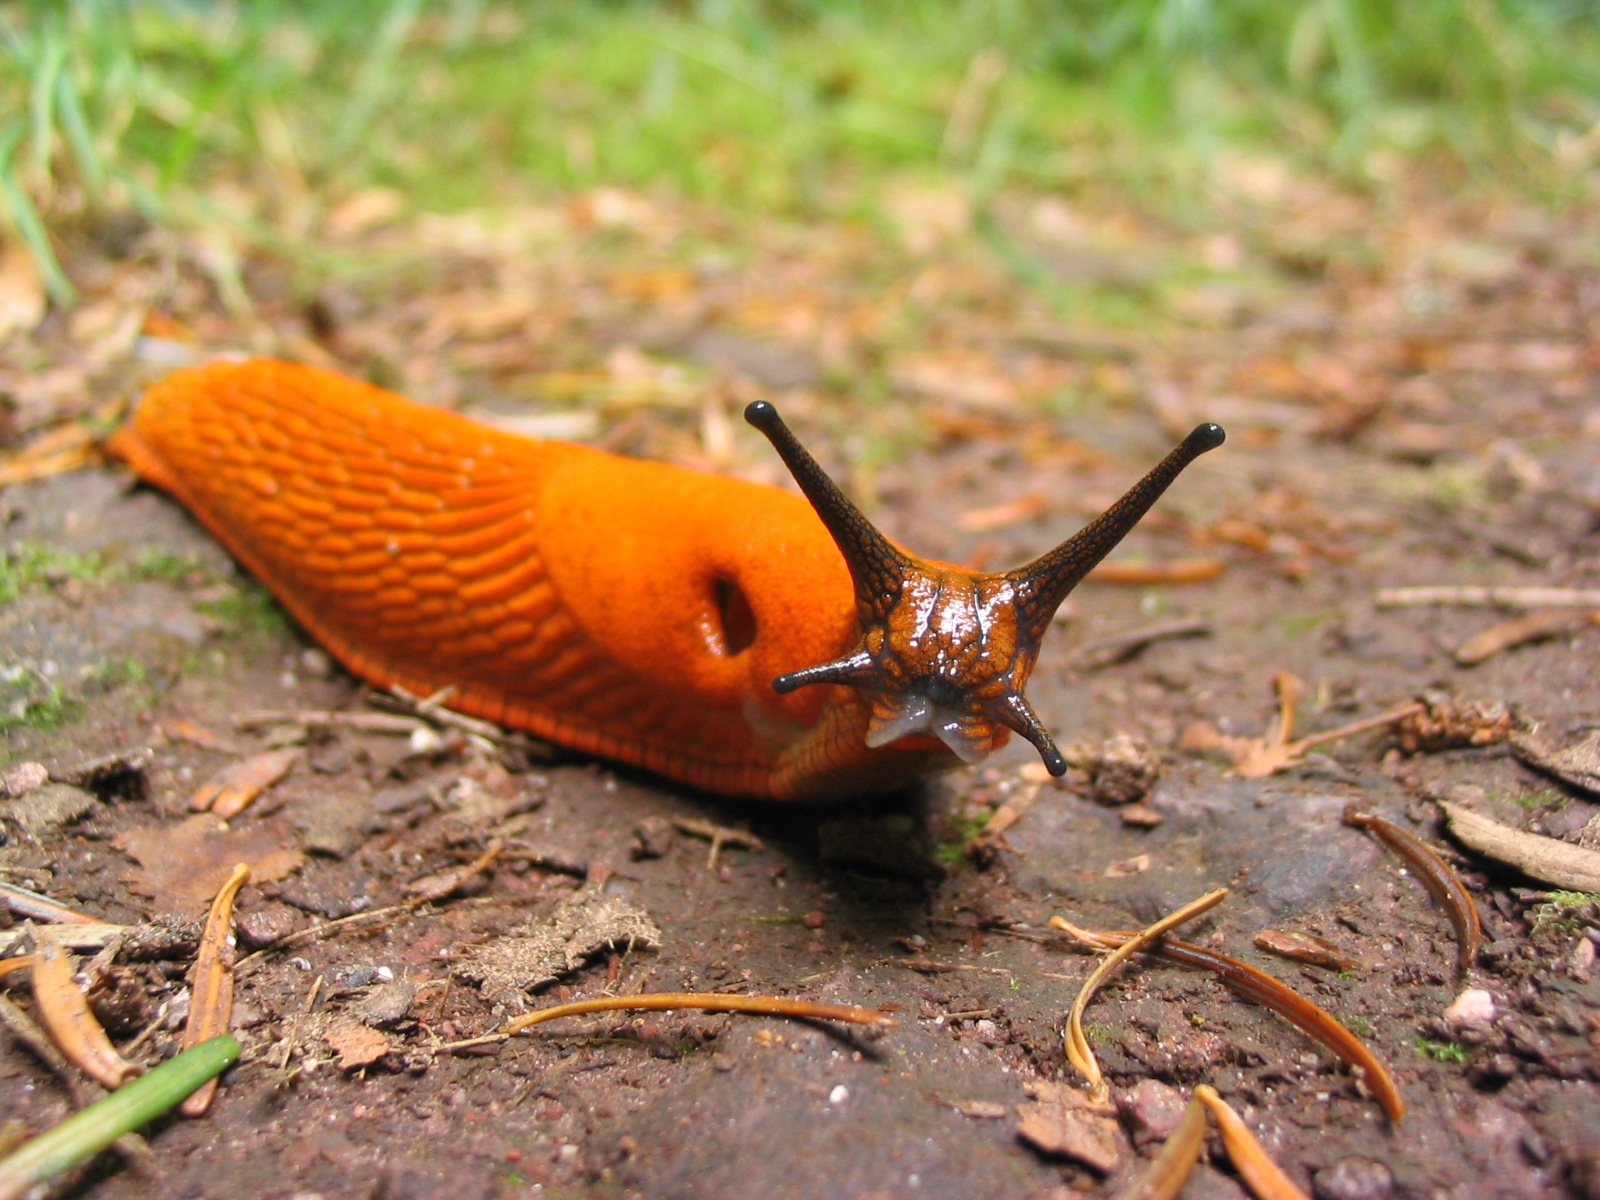 Even bloby life forms like this slug have appendages.